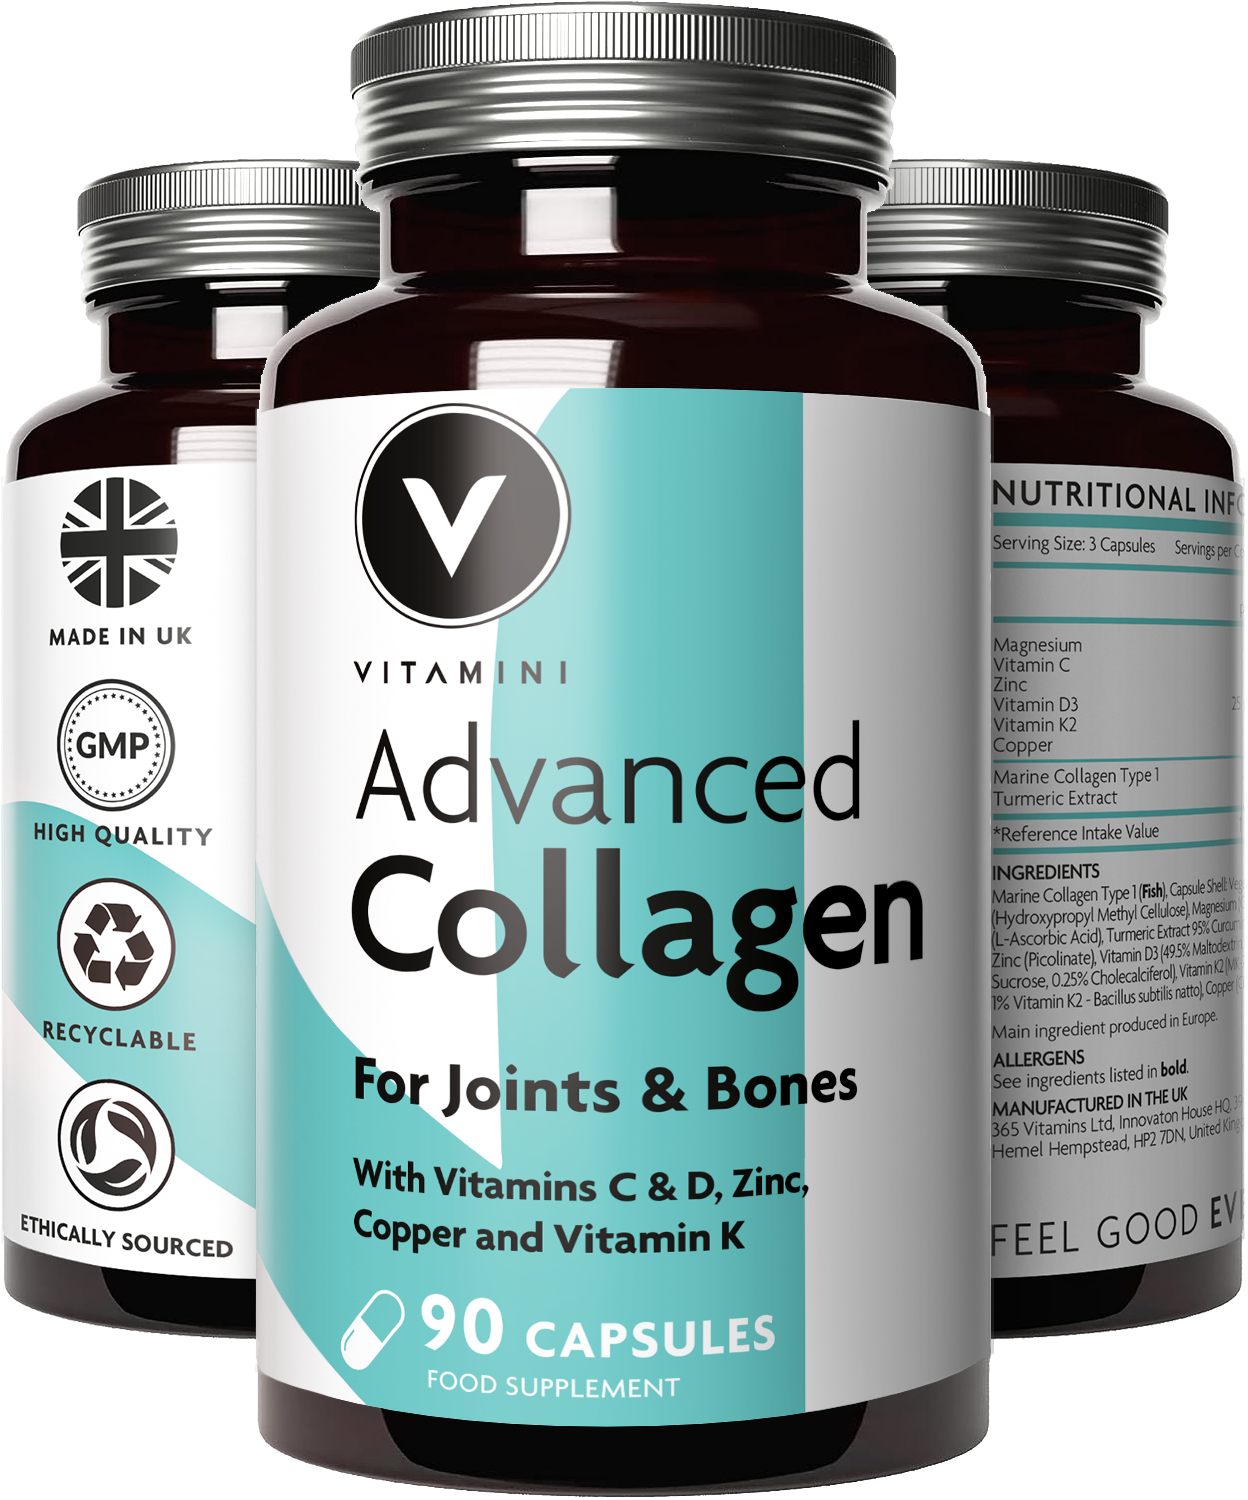 Three bottles of Advanced Collagen for joints and bones. Label reads with vitamins C & D, zinc, copper and vitamin k. 90 capsules food supplement. Made in the UK. High quality. Recyclable. Ethically sourced. 